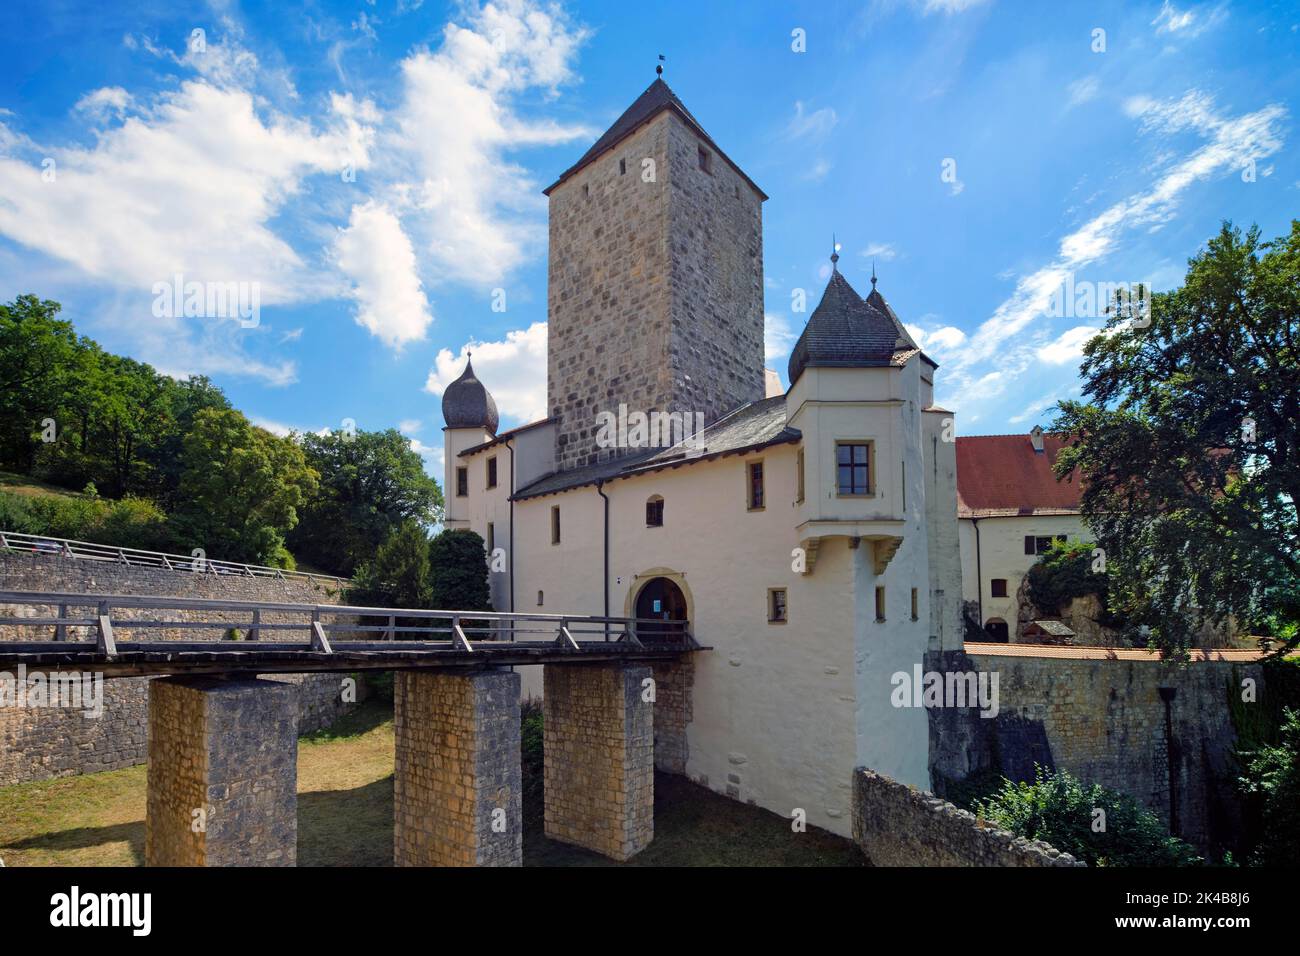 Prunn Castle, hilltop castle, first mentioned in 1037, stands on the Main-Danube Canal, Schlossprunn, part of the town of Riedenburg, Altmuehltal Stock Photo